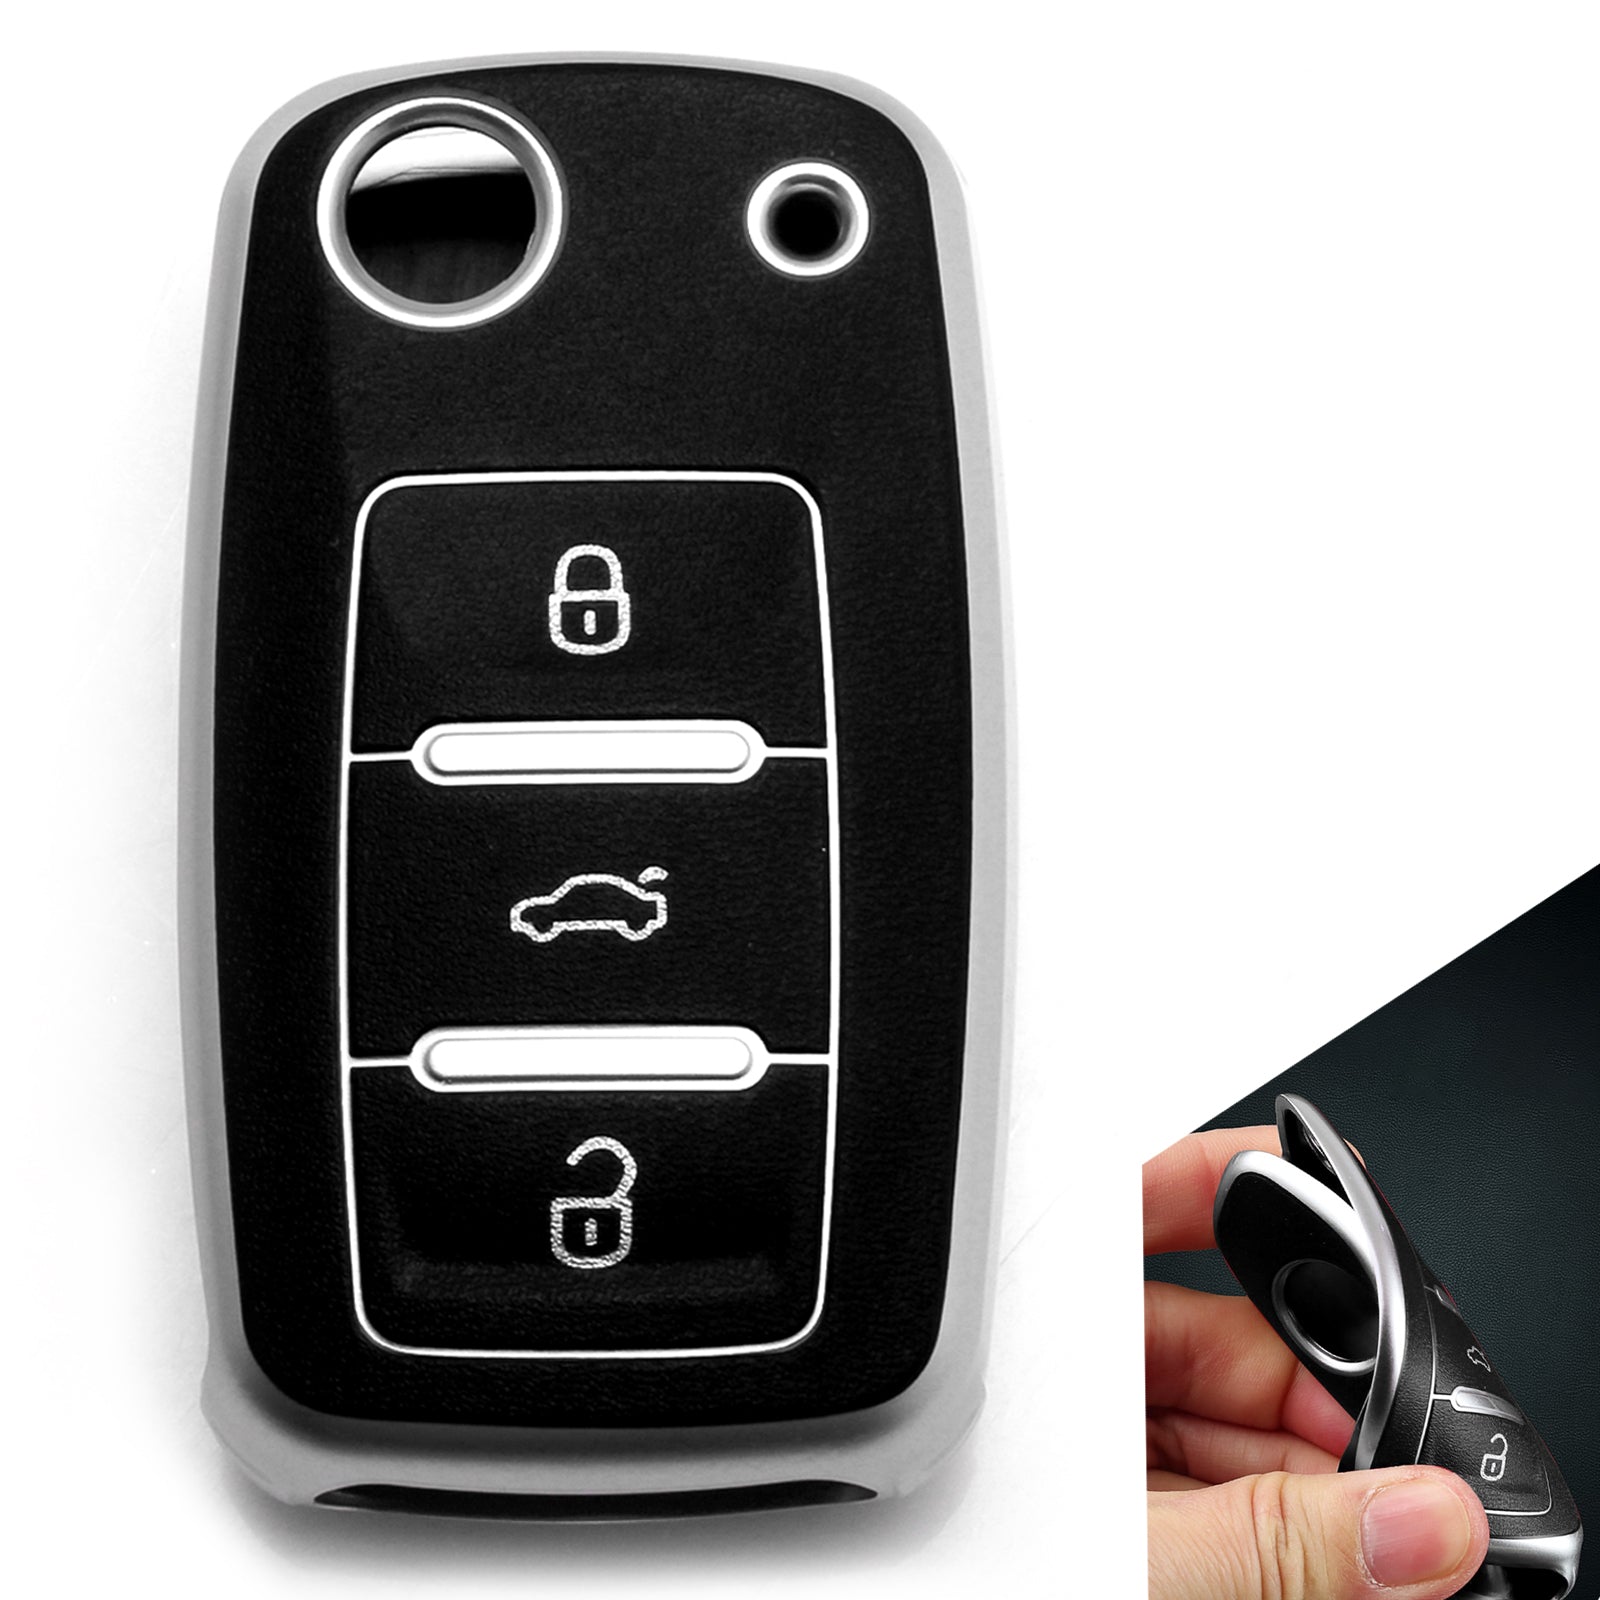 Buy Car Key Cover For Volkswagen, Full Protection Key Fob Cover